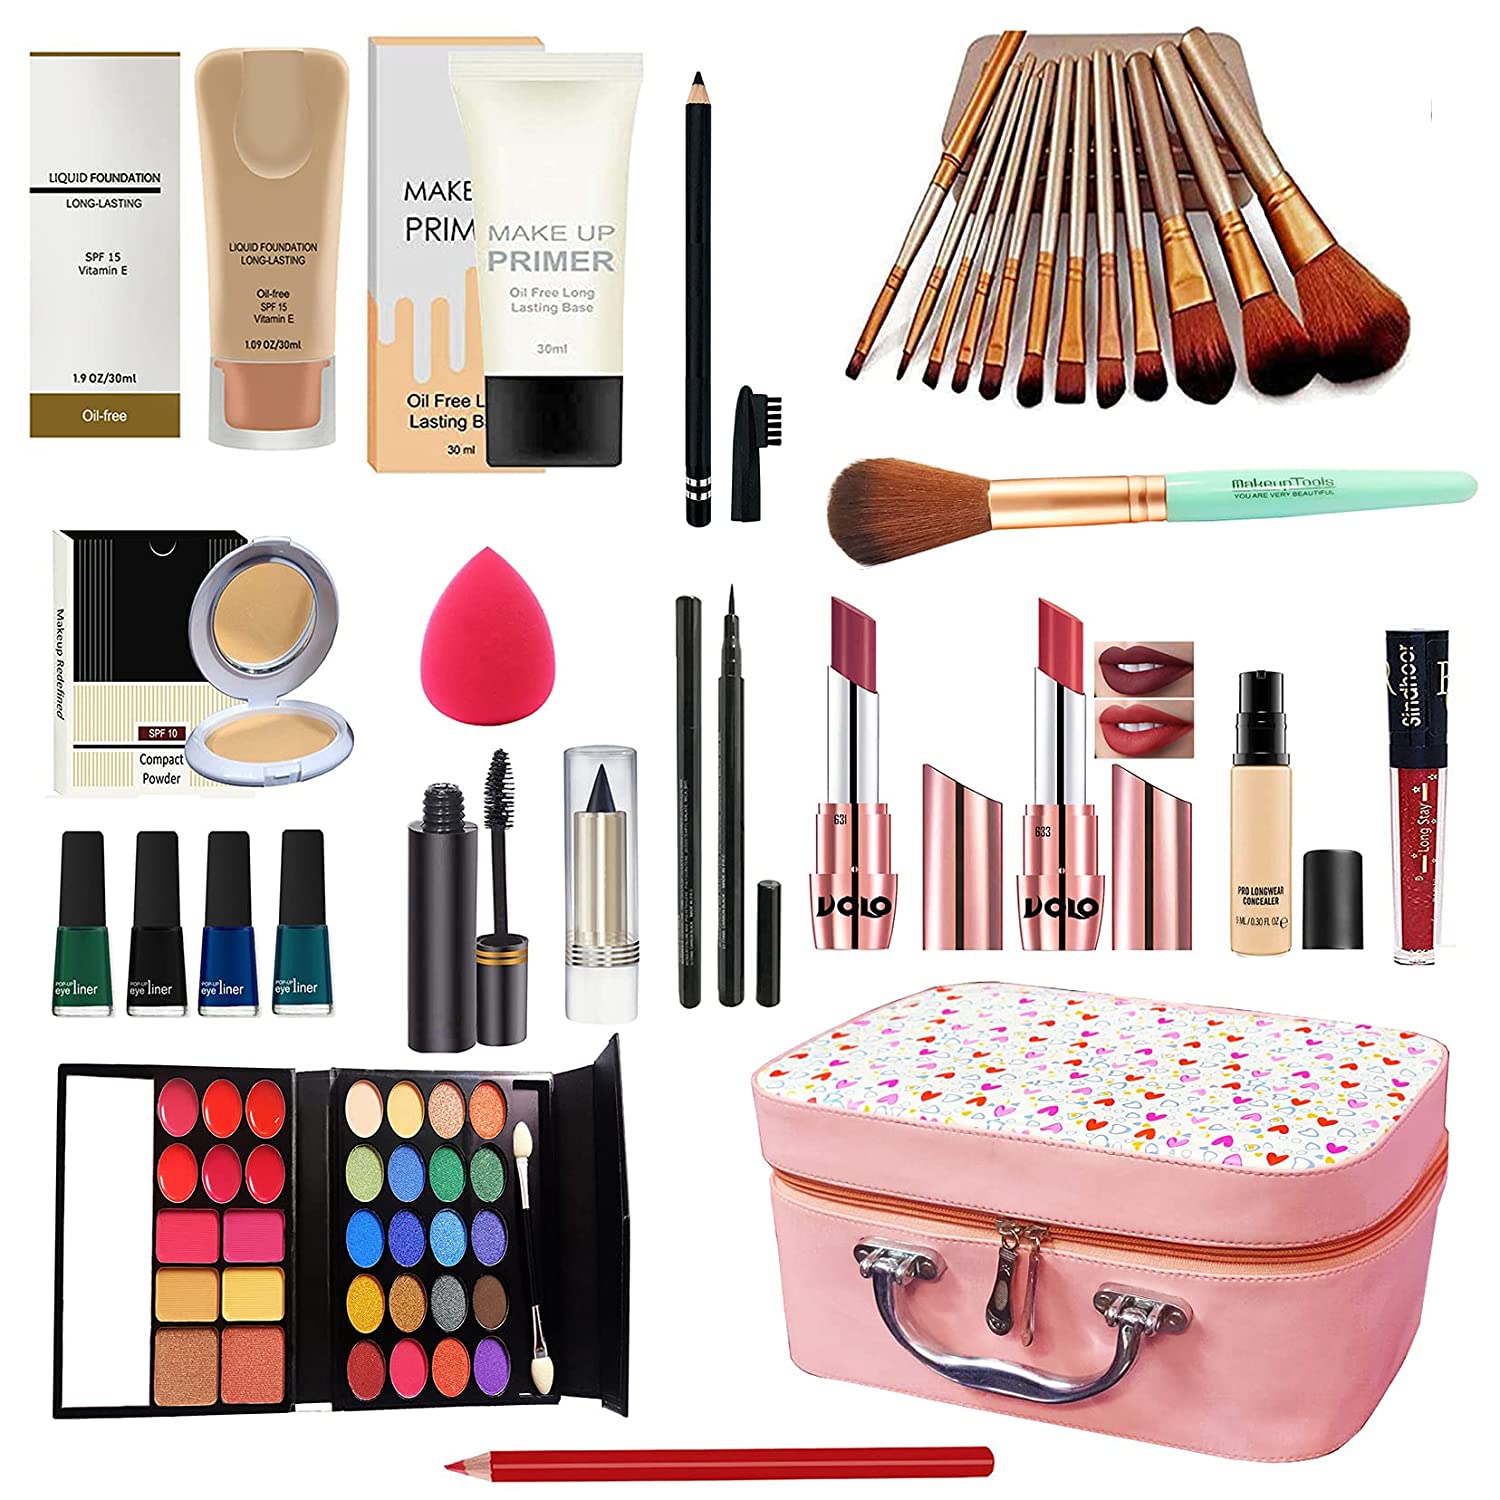  Volo All In One Makeup Kit-Best Makeup Kits For Girls